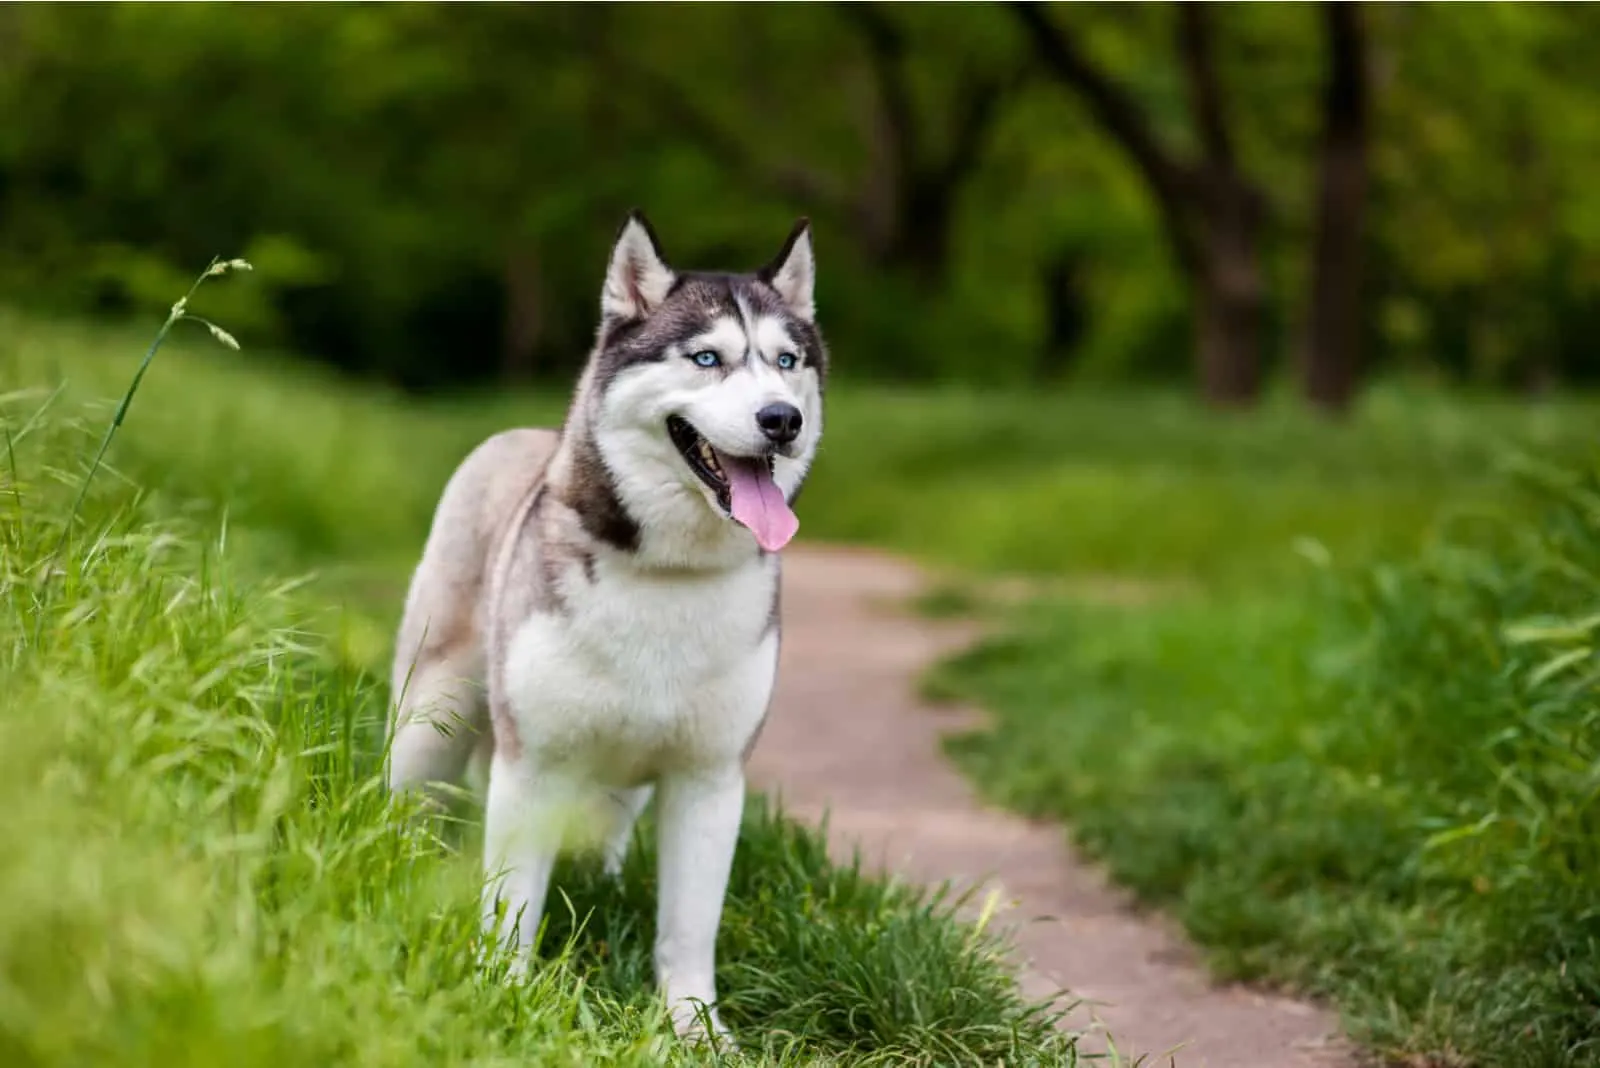 husky dog with blue eyes stands and looks ahead